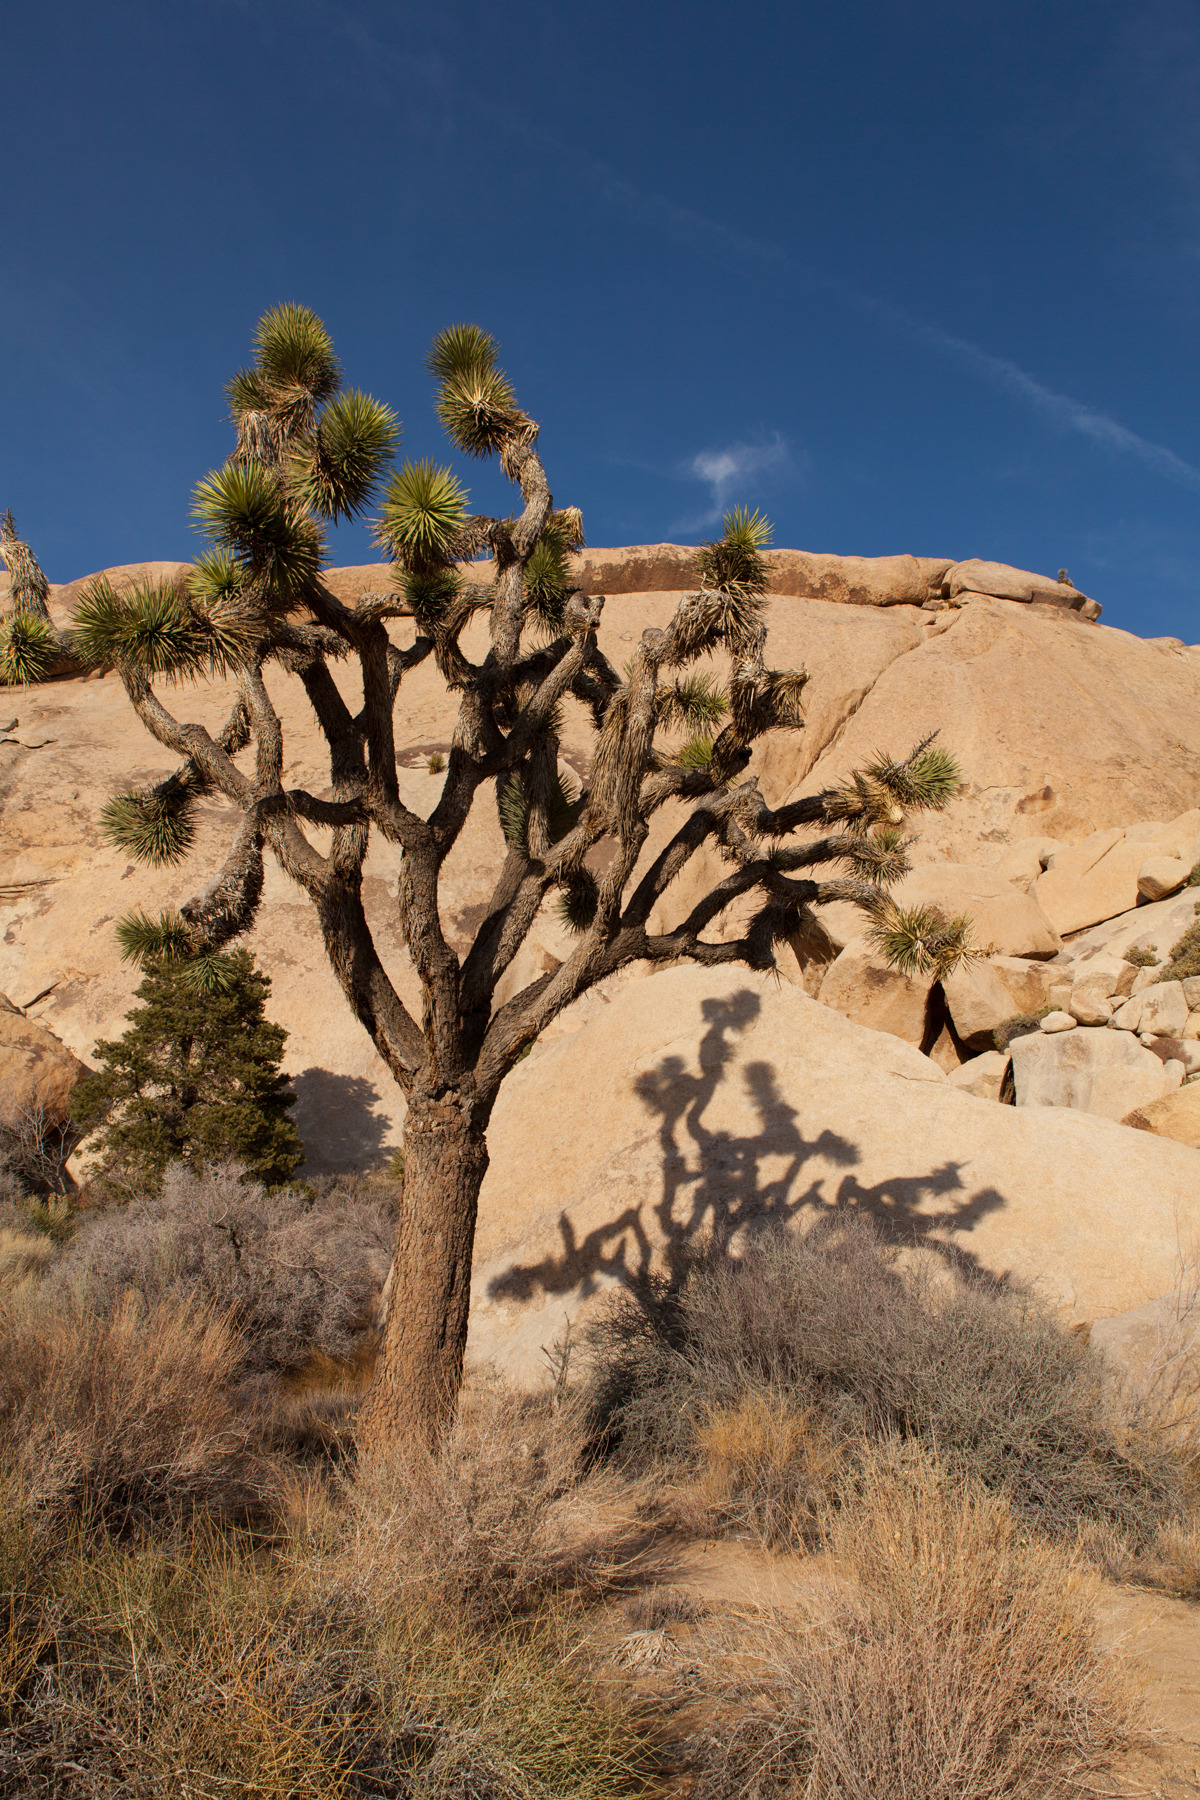 This is what a Joshua Tree looks like, if you’ve not seen them. They grow 1 inch per year.